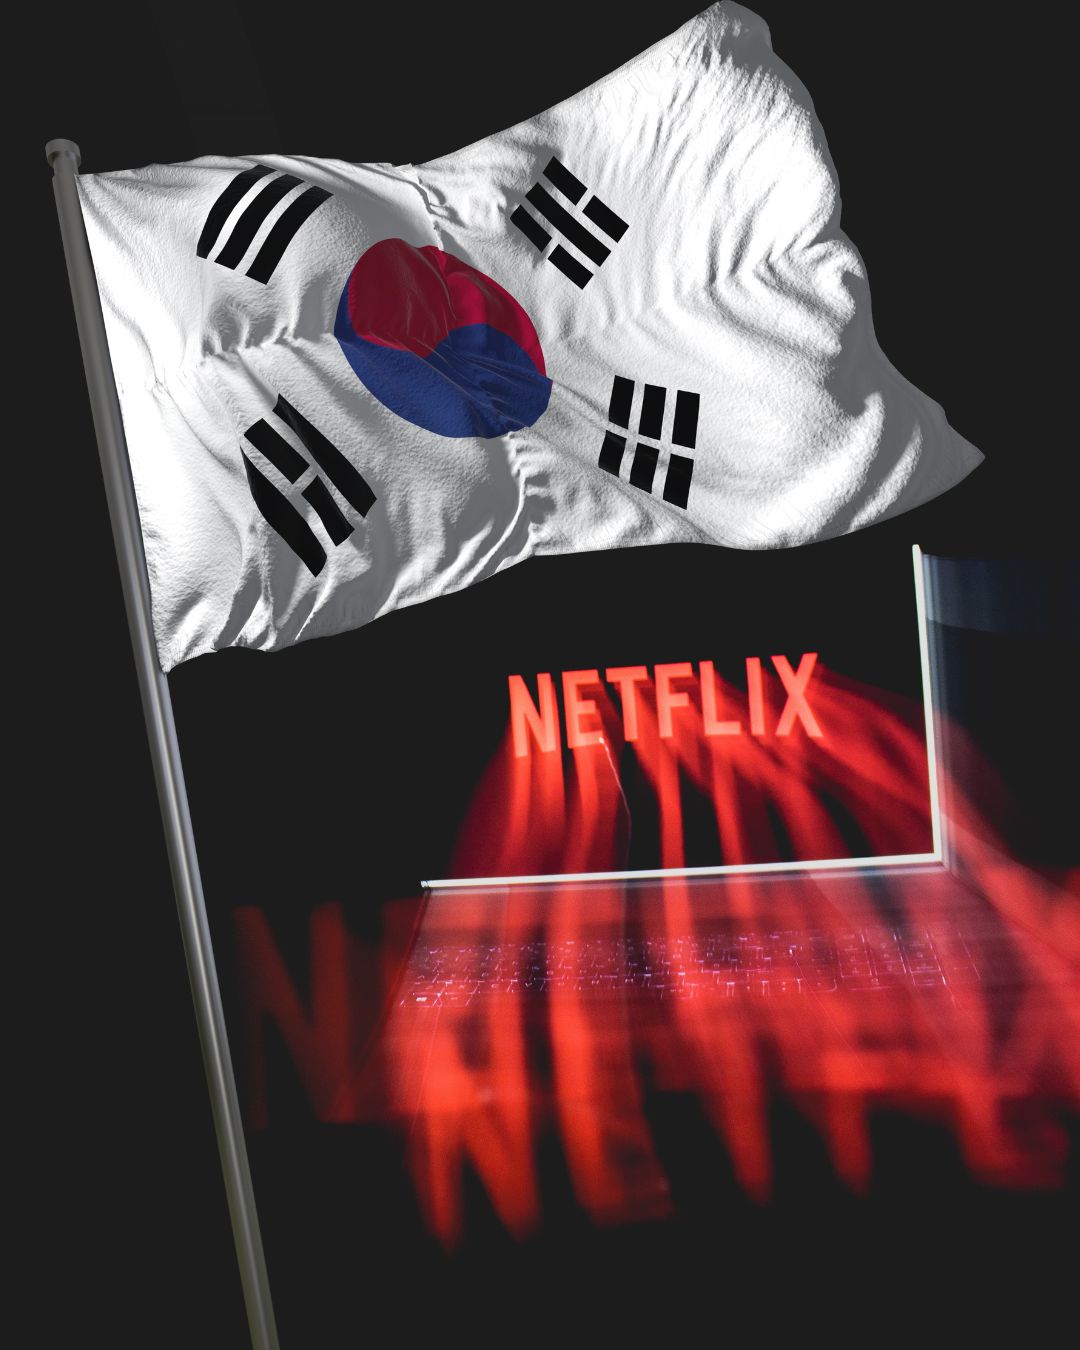 Is Netflix Riding the Korean Wave or Vice Versa?| Netflix and the Global Receptions of Korean Popular Culture: Transnational Perspectives